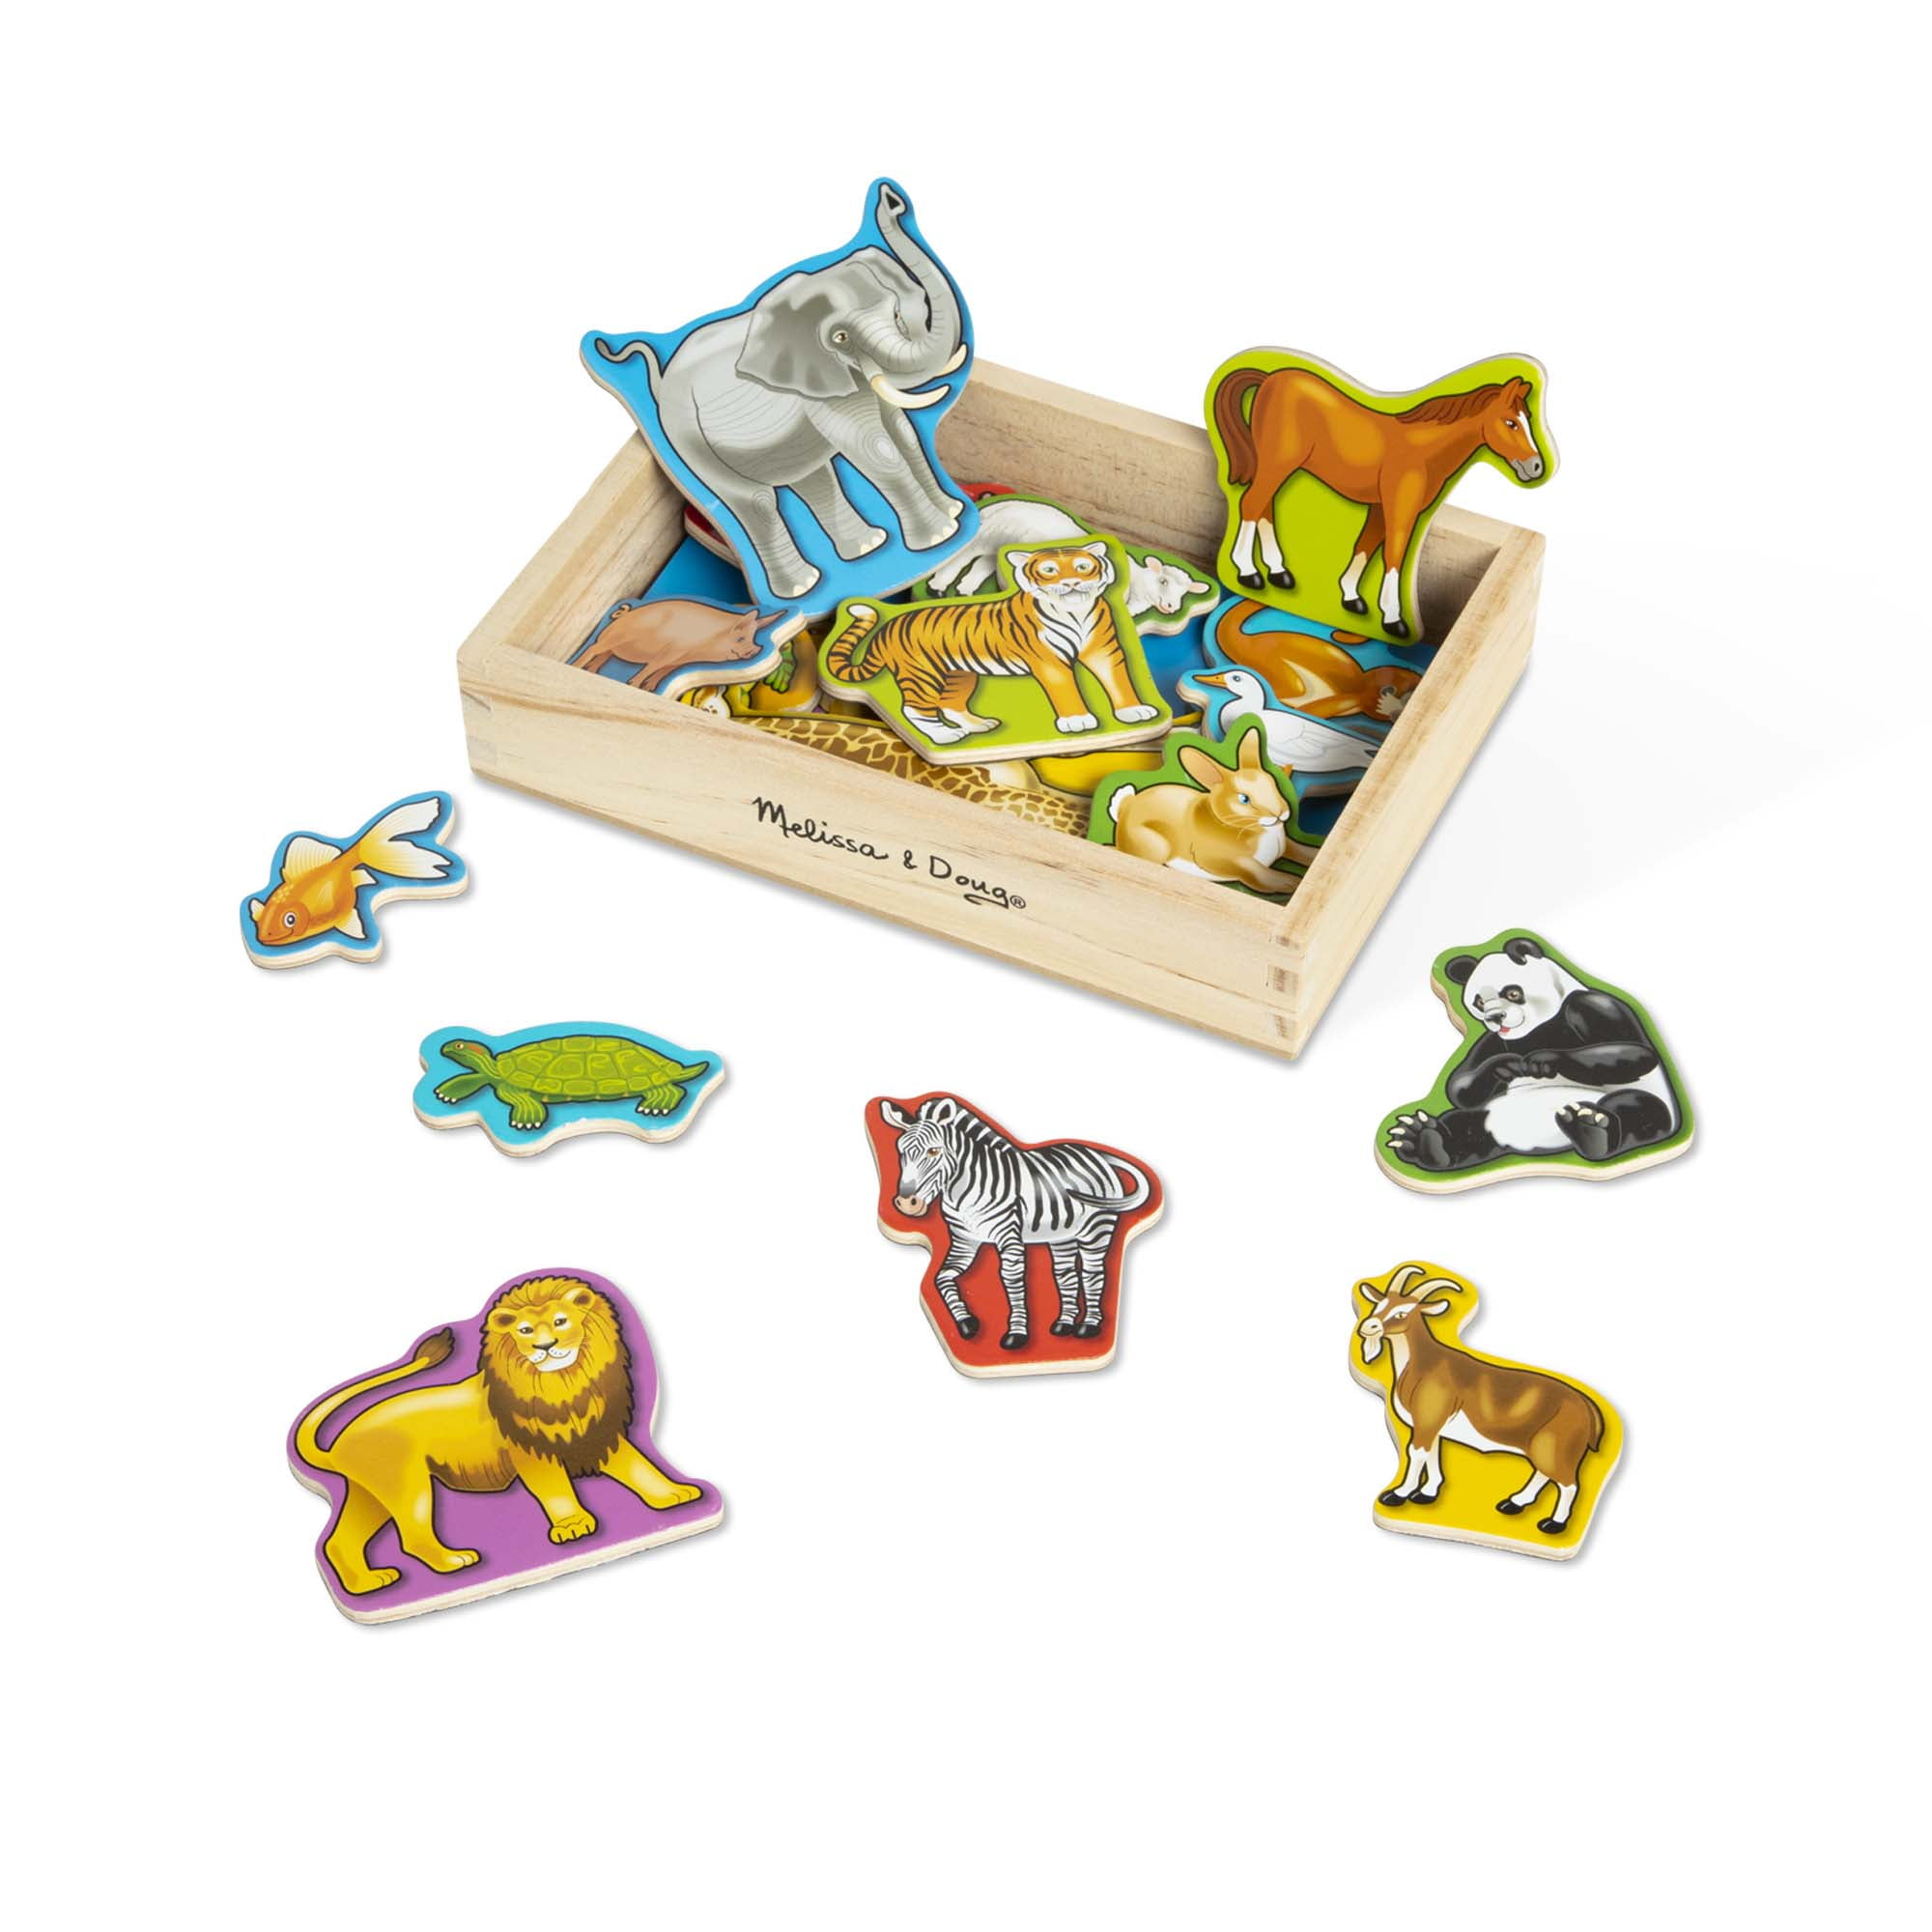 Melissa & Doug 20 Wooden Animal Magnets in a Box 